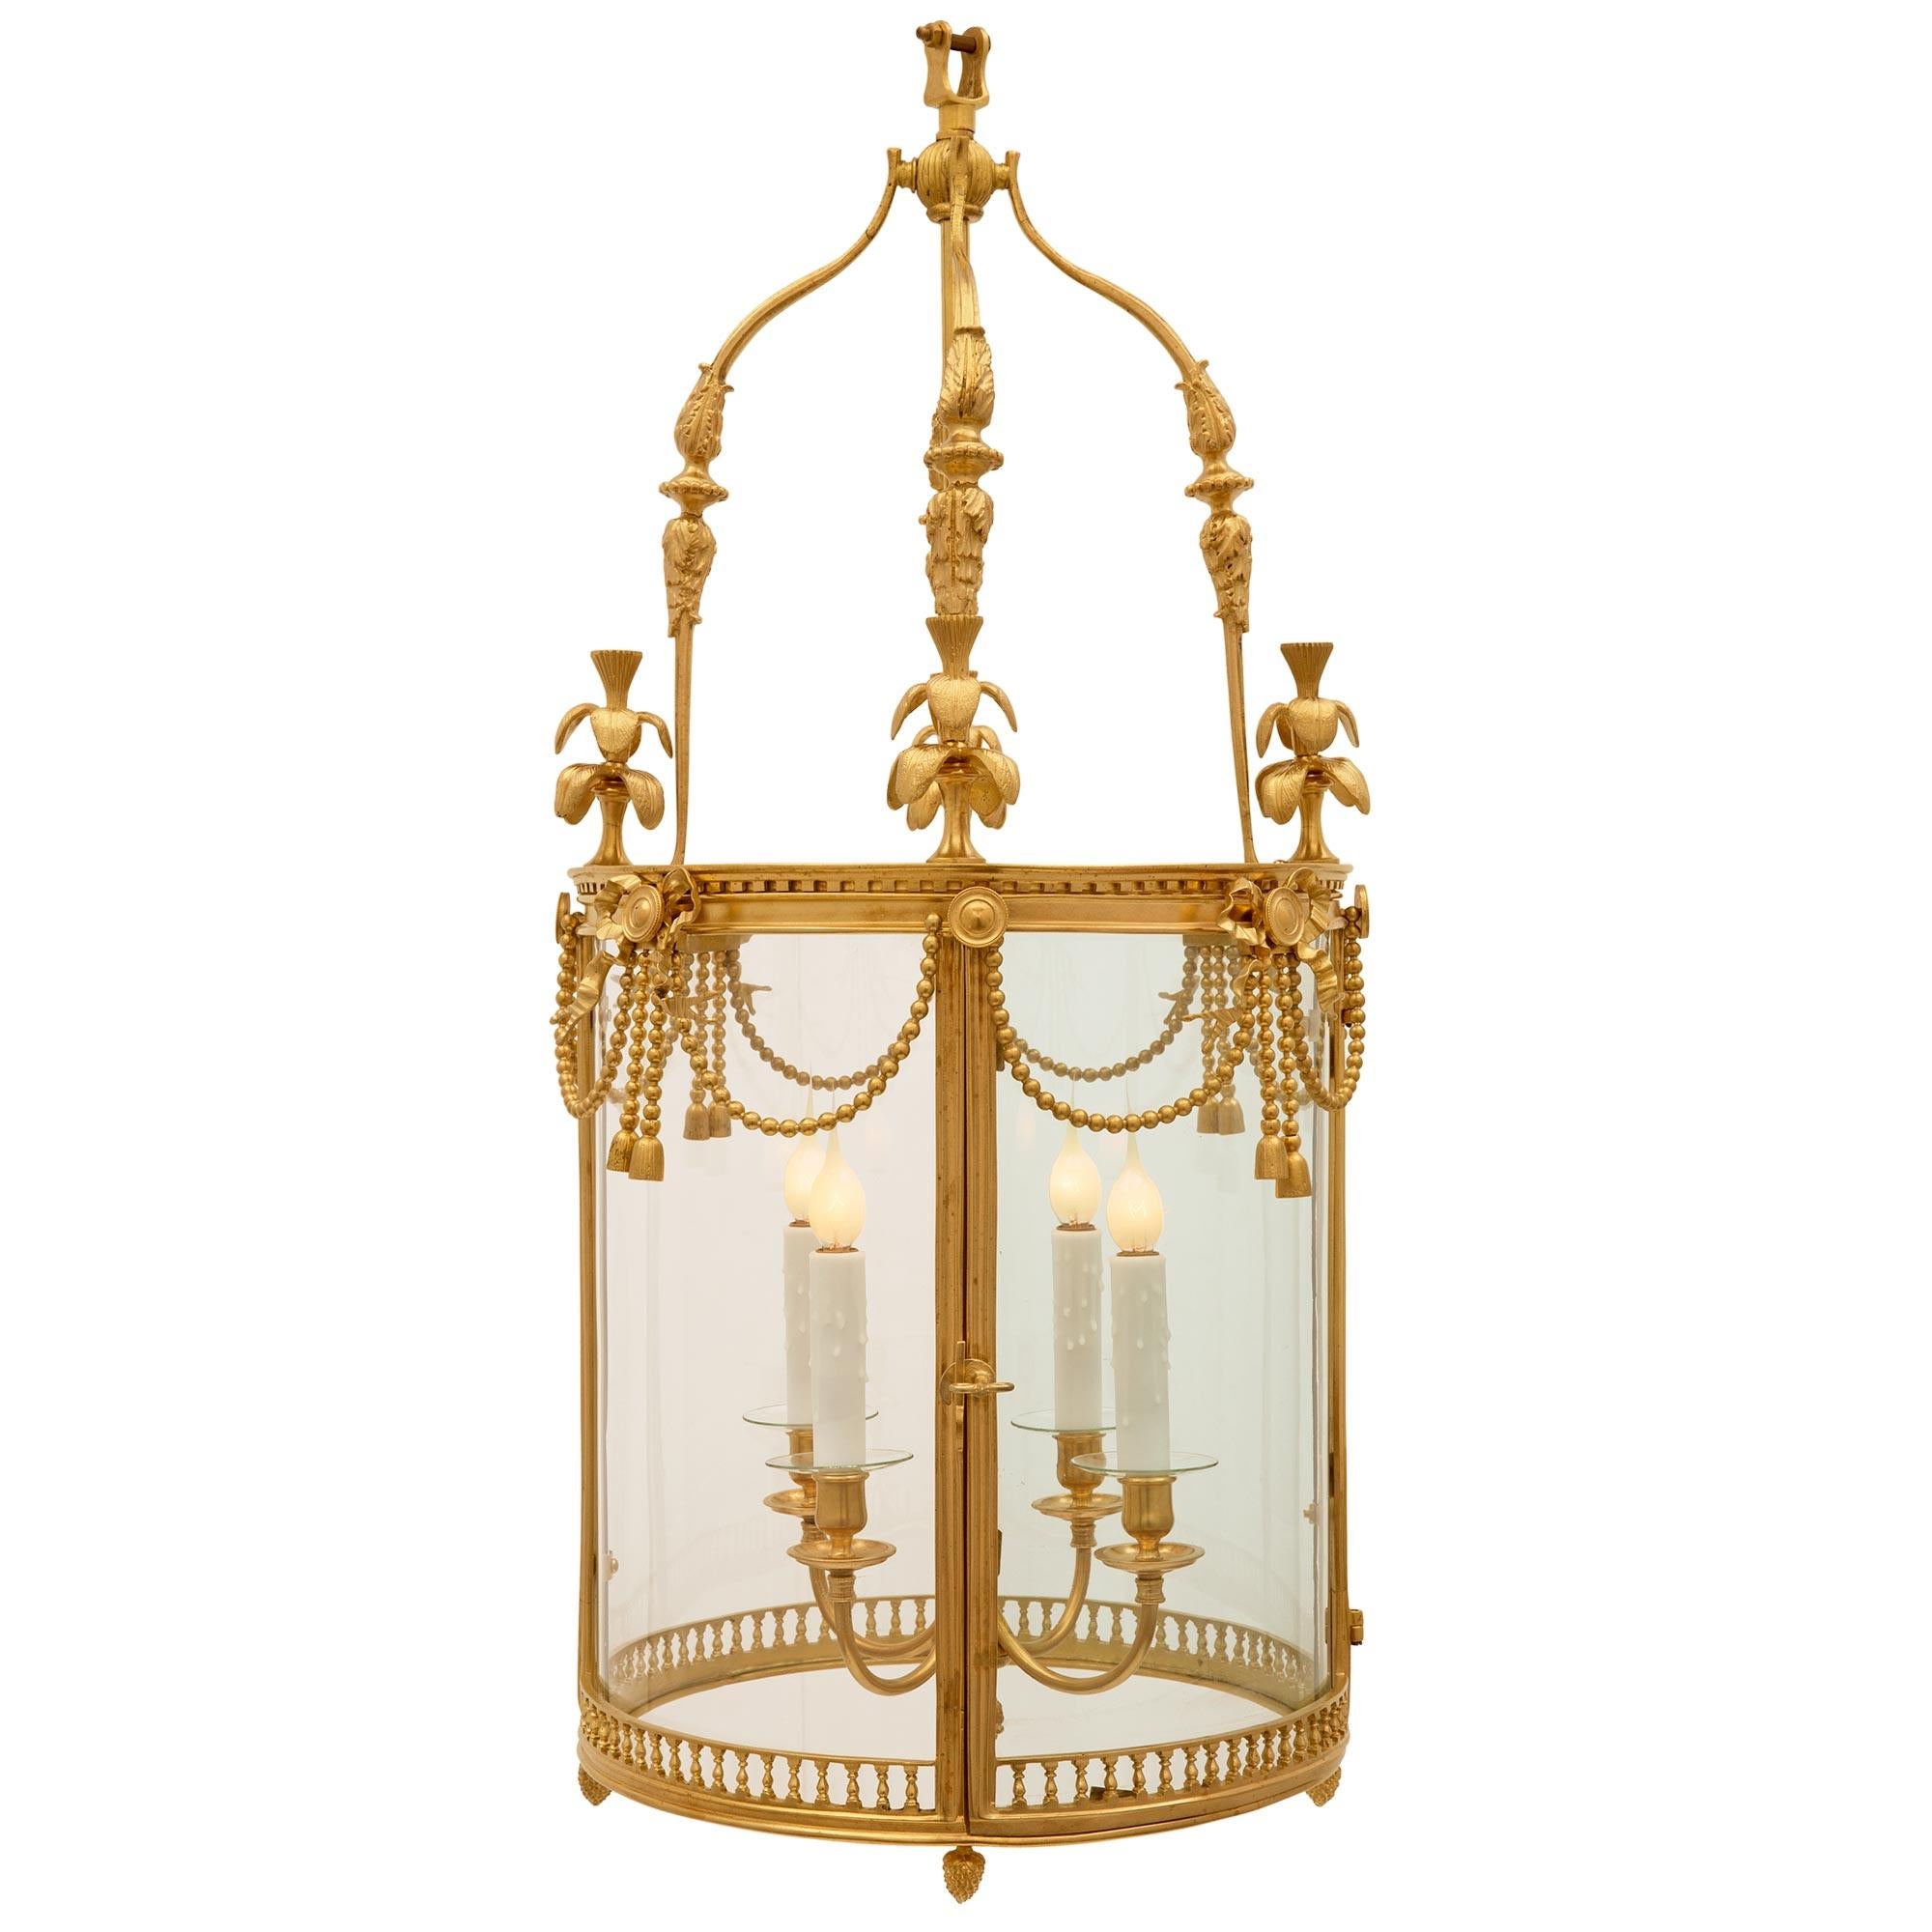 A charming and extremely decorative French 19th century Louis XVI st. ormolu and glass lantern. The lantern displays a fine pierced baluster shaped wrap around ormolu band at the base with four fine acorn finals. The four original curved hand blown